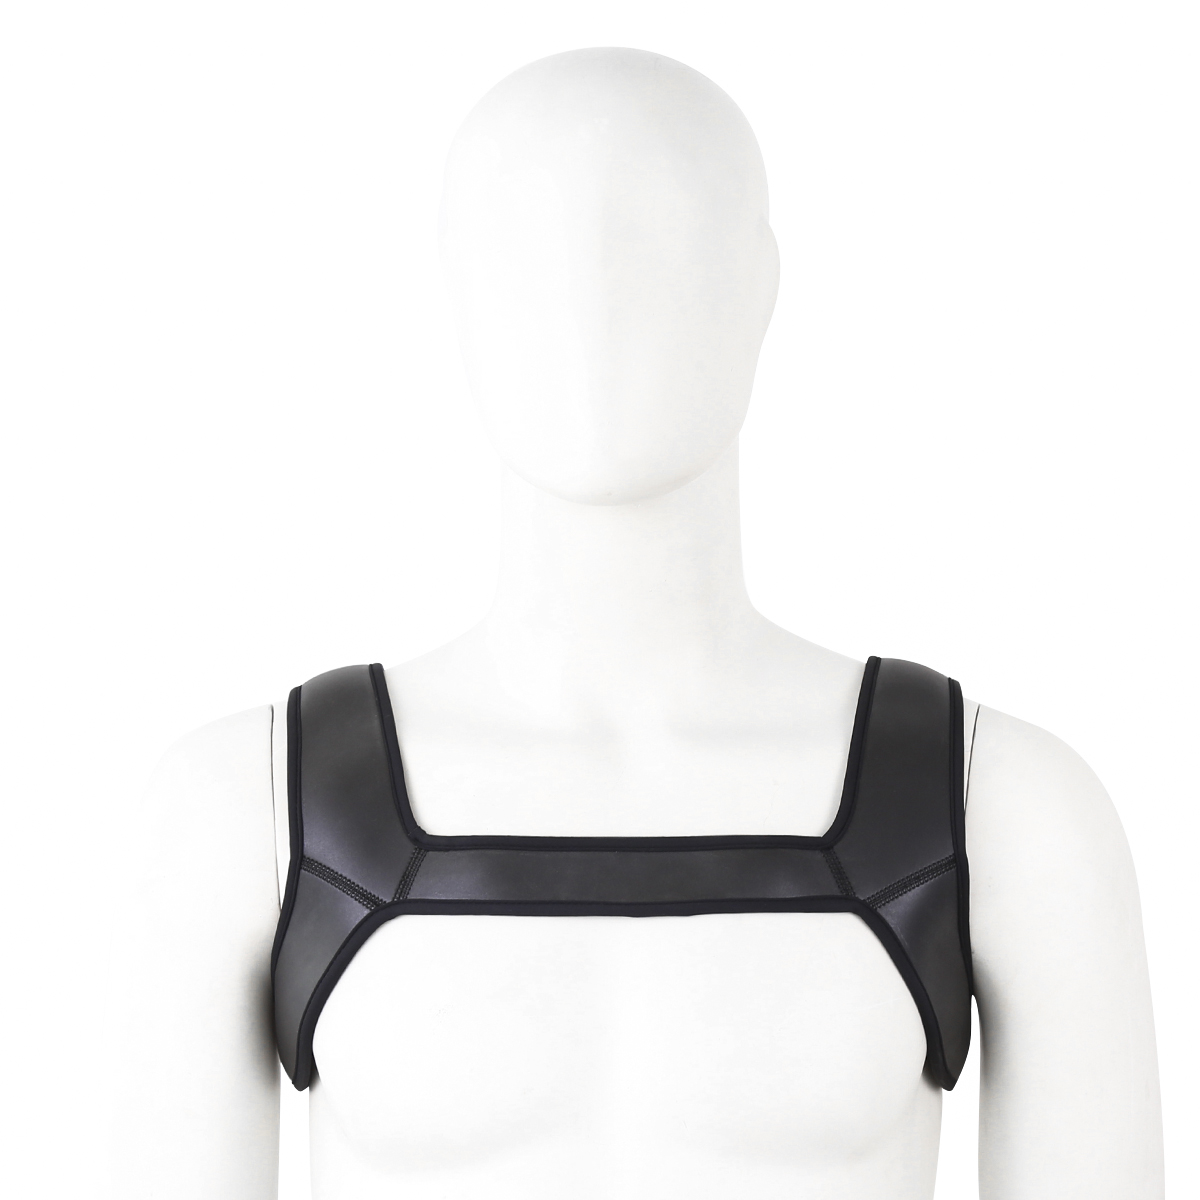 Harness-Sport-Muscle-Protector-M-OPR-321004-2